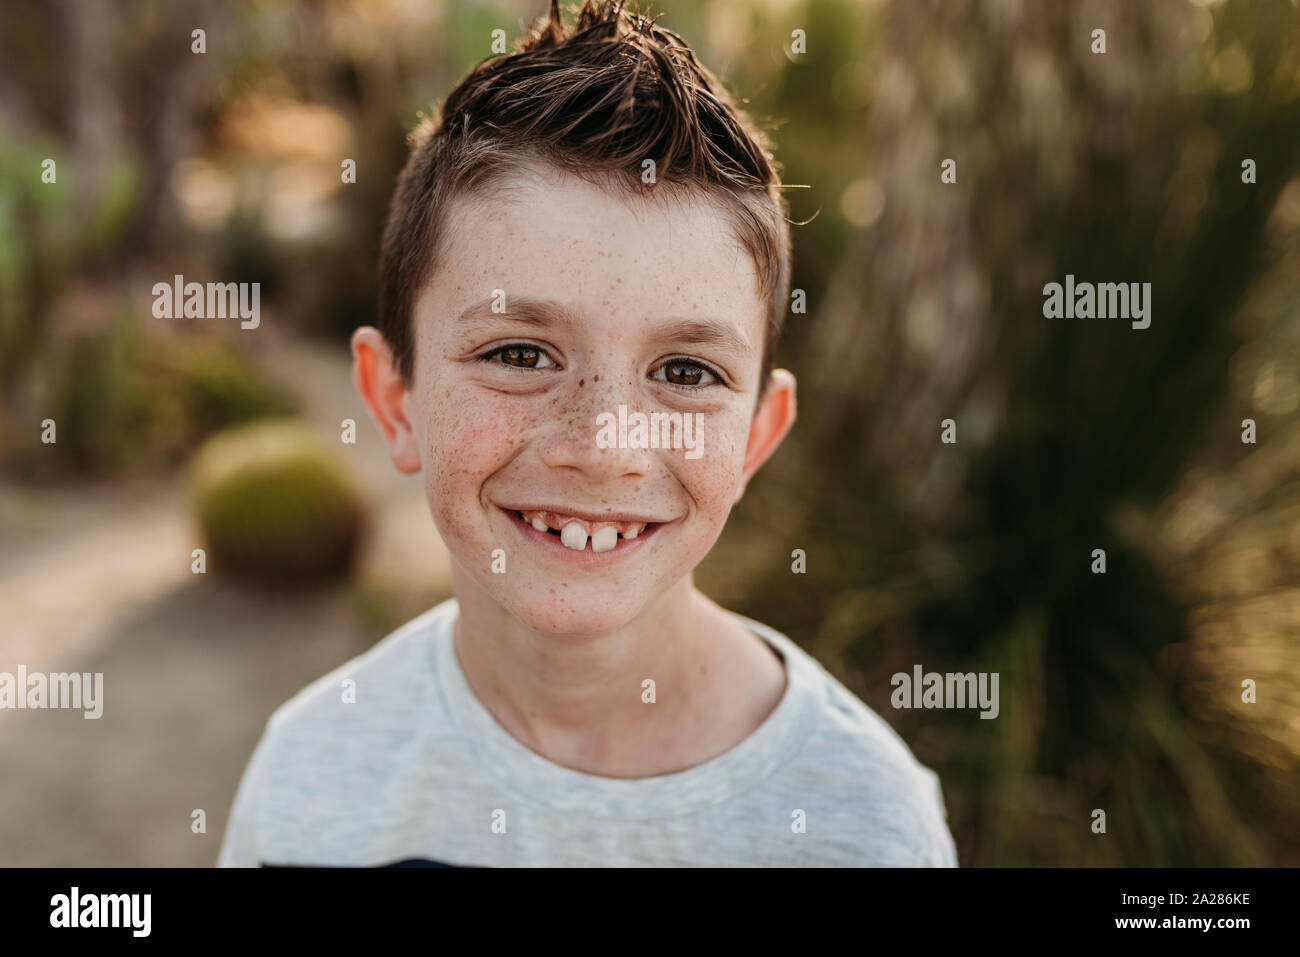 Close up portrait of cute young boy with freckles smiling Stock Photo